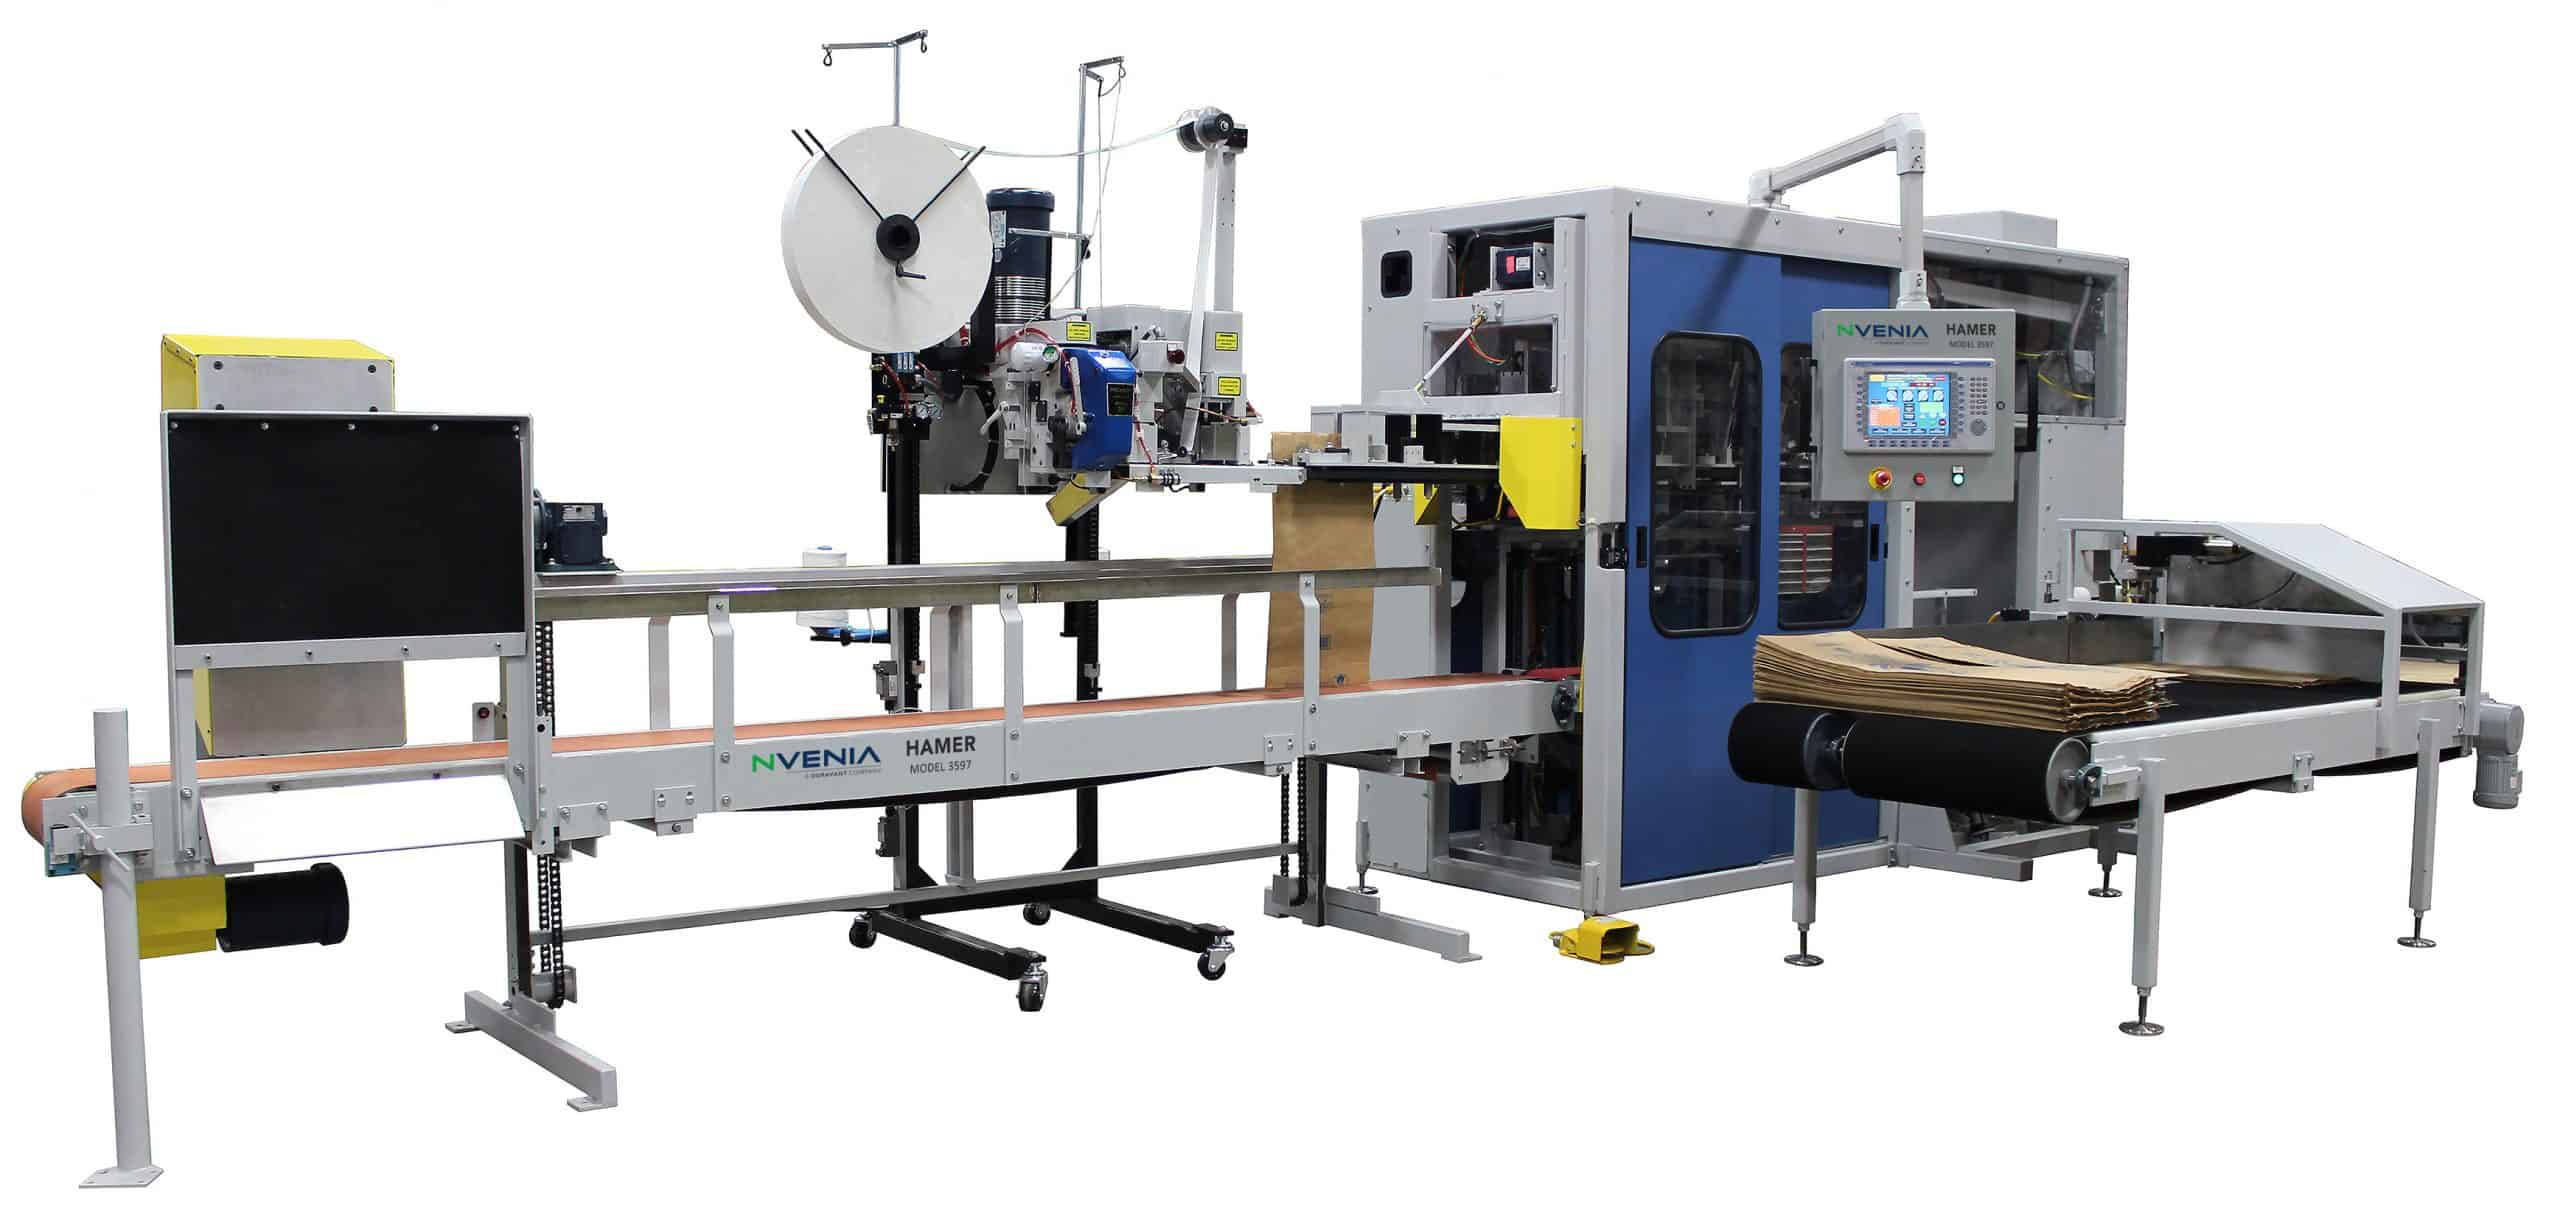 Little-known Uses for Your EZ Bagging Machine - EZ Machinery